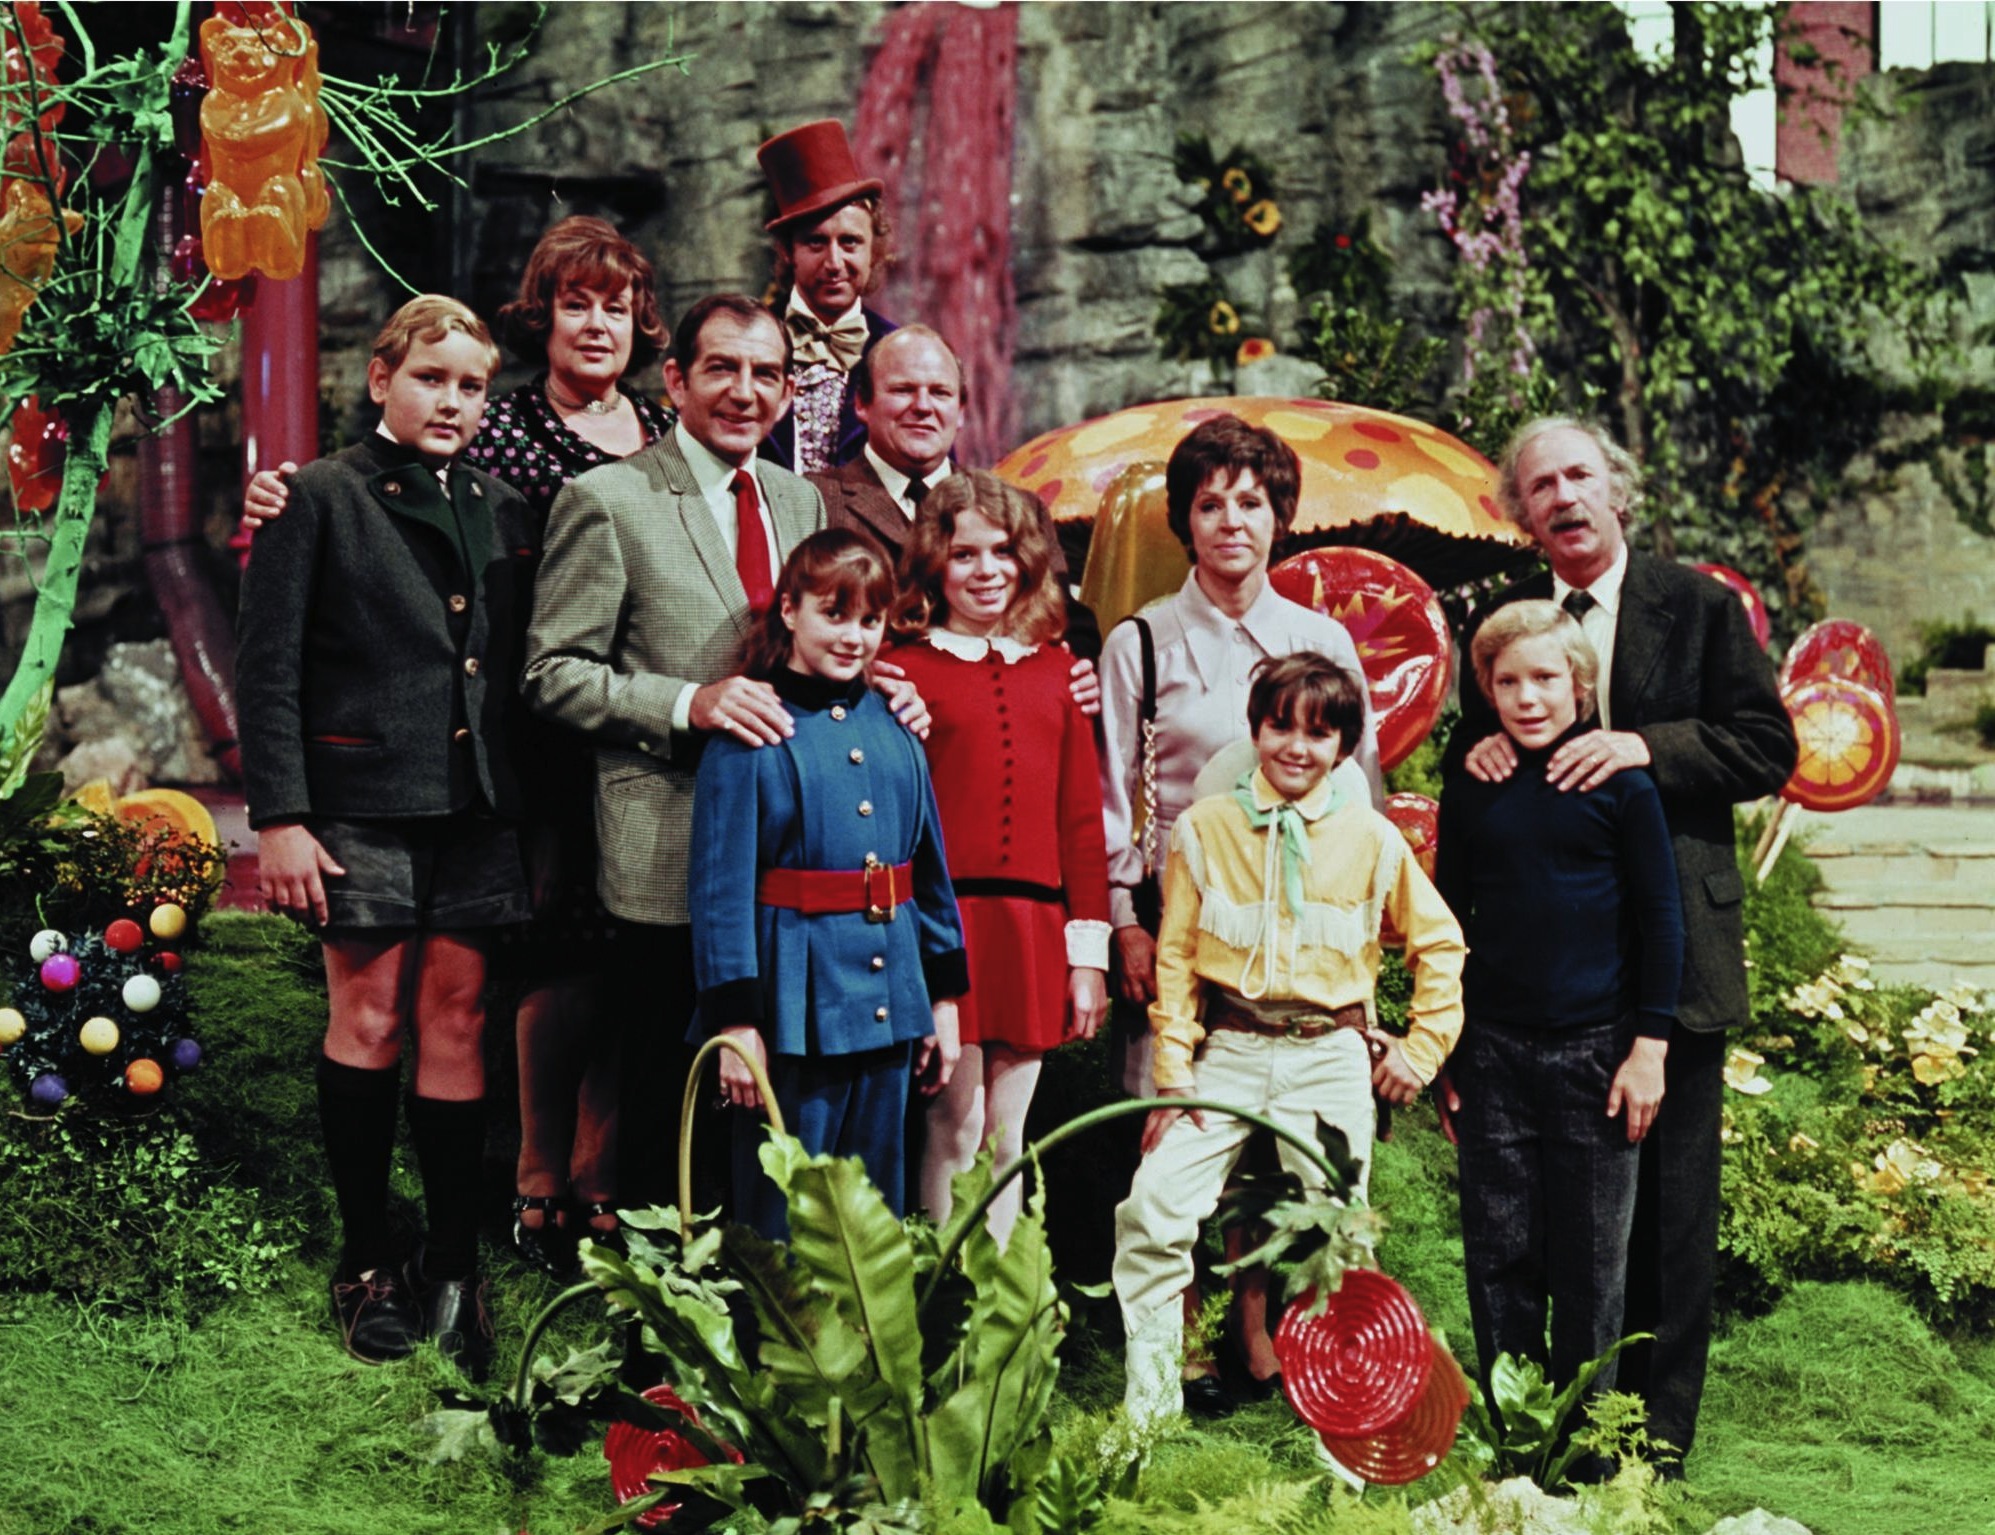 Promotional still for WILLY WONKA & THE CHOCOLATE FACTORY (1971)